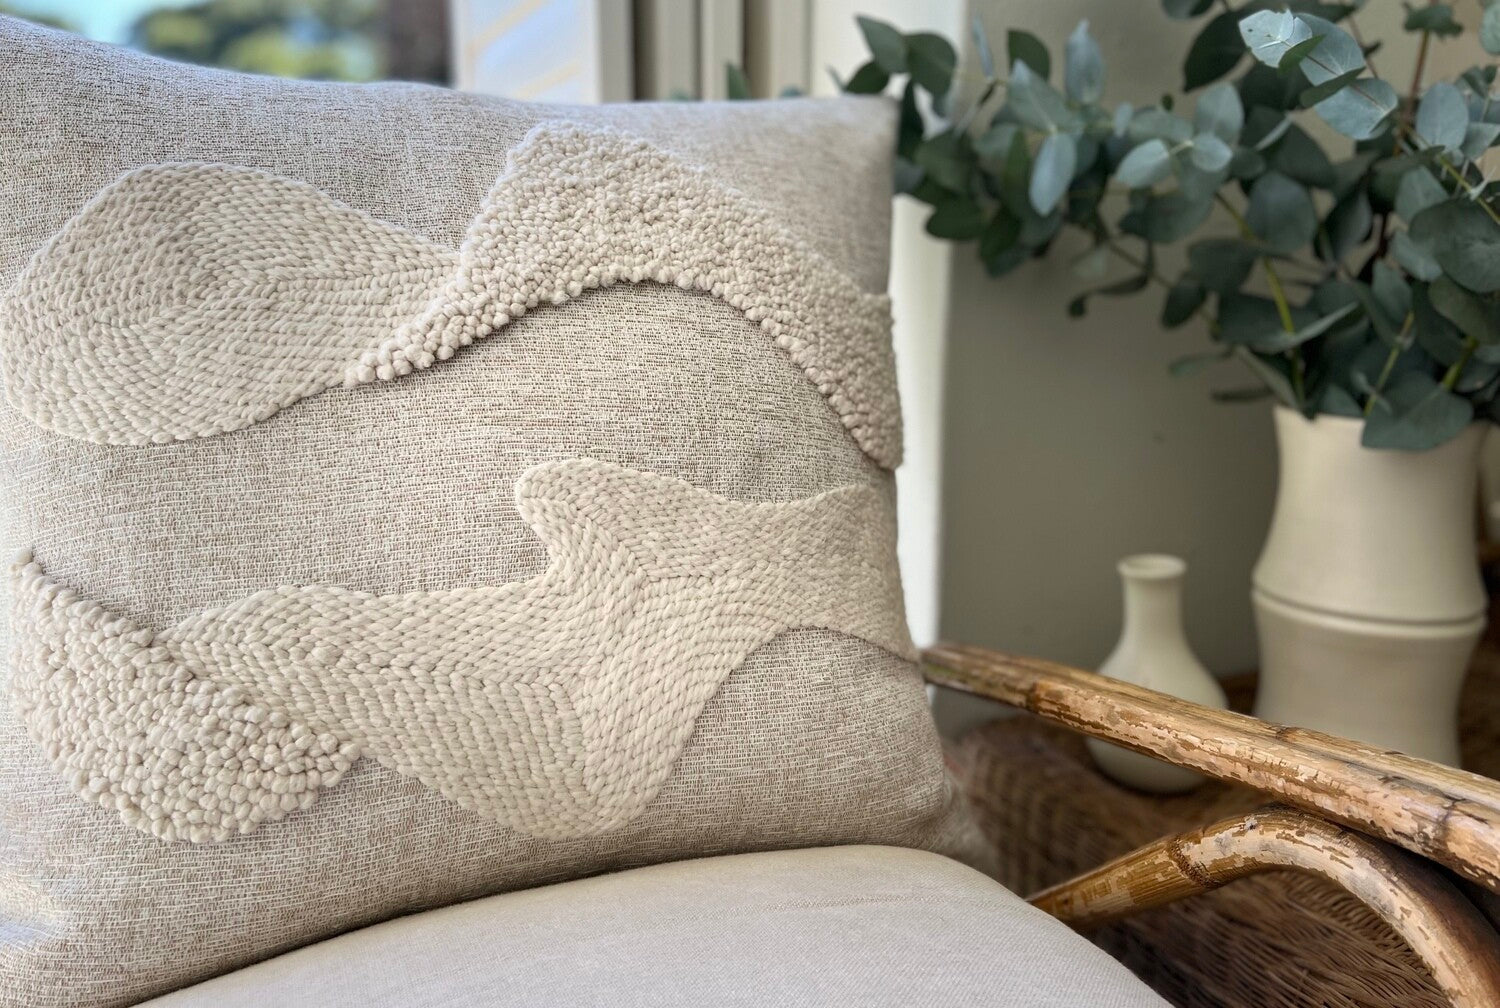 Scatter_Cushion_Punchneedle_Natural_Linen